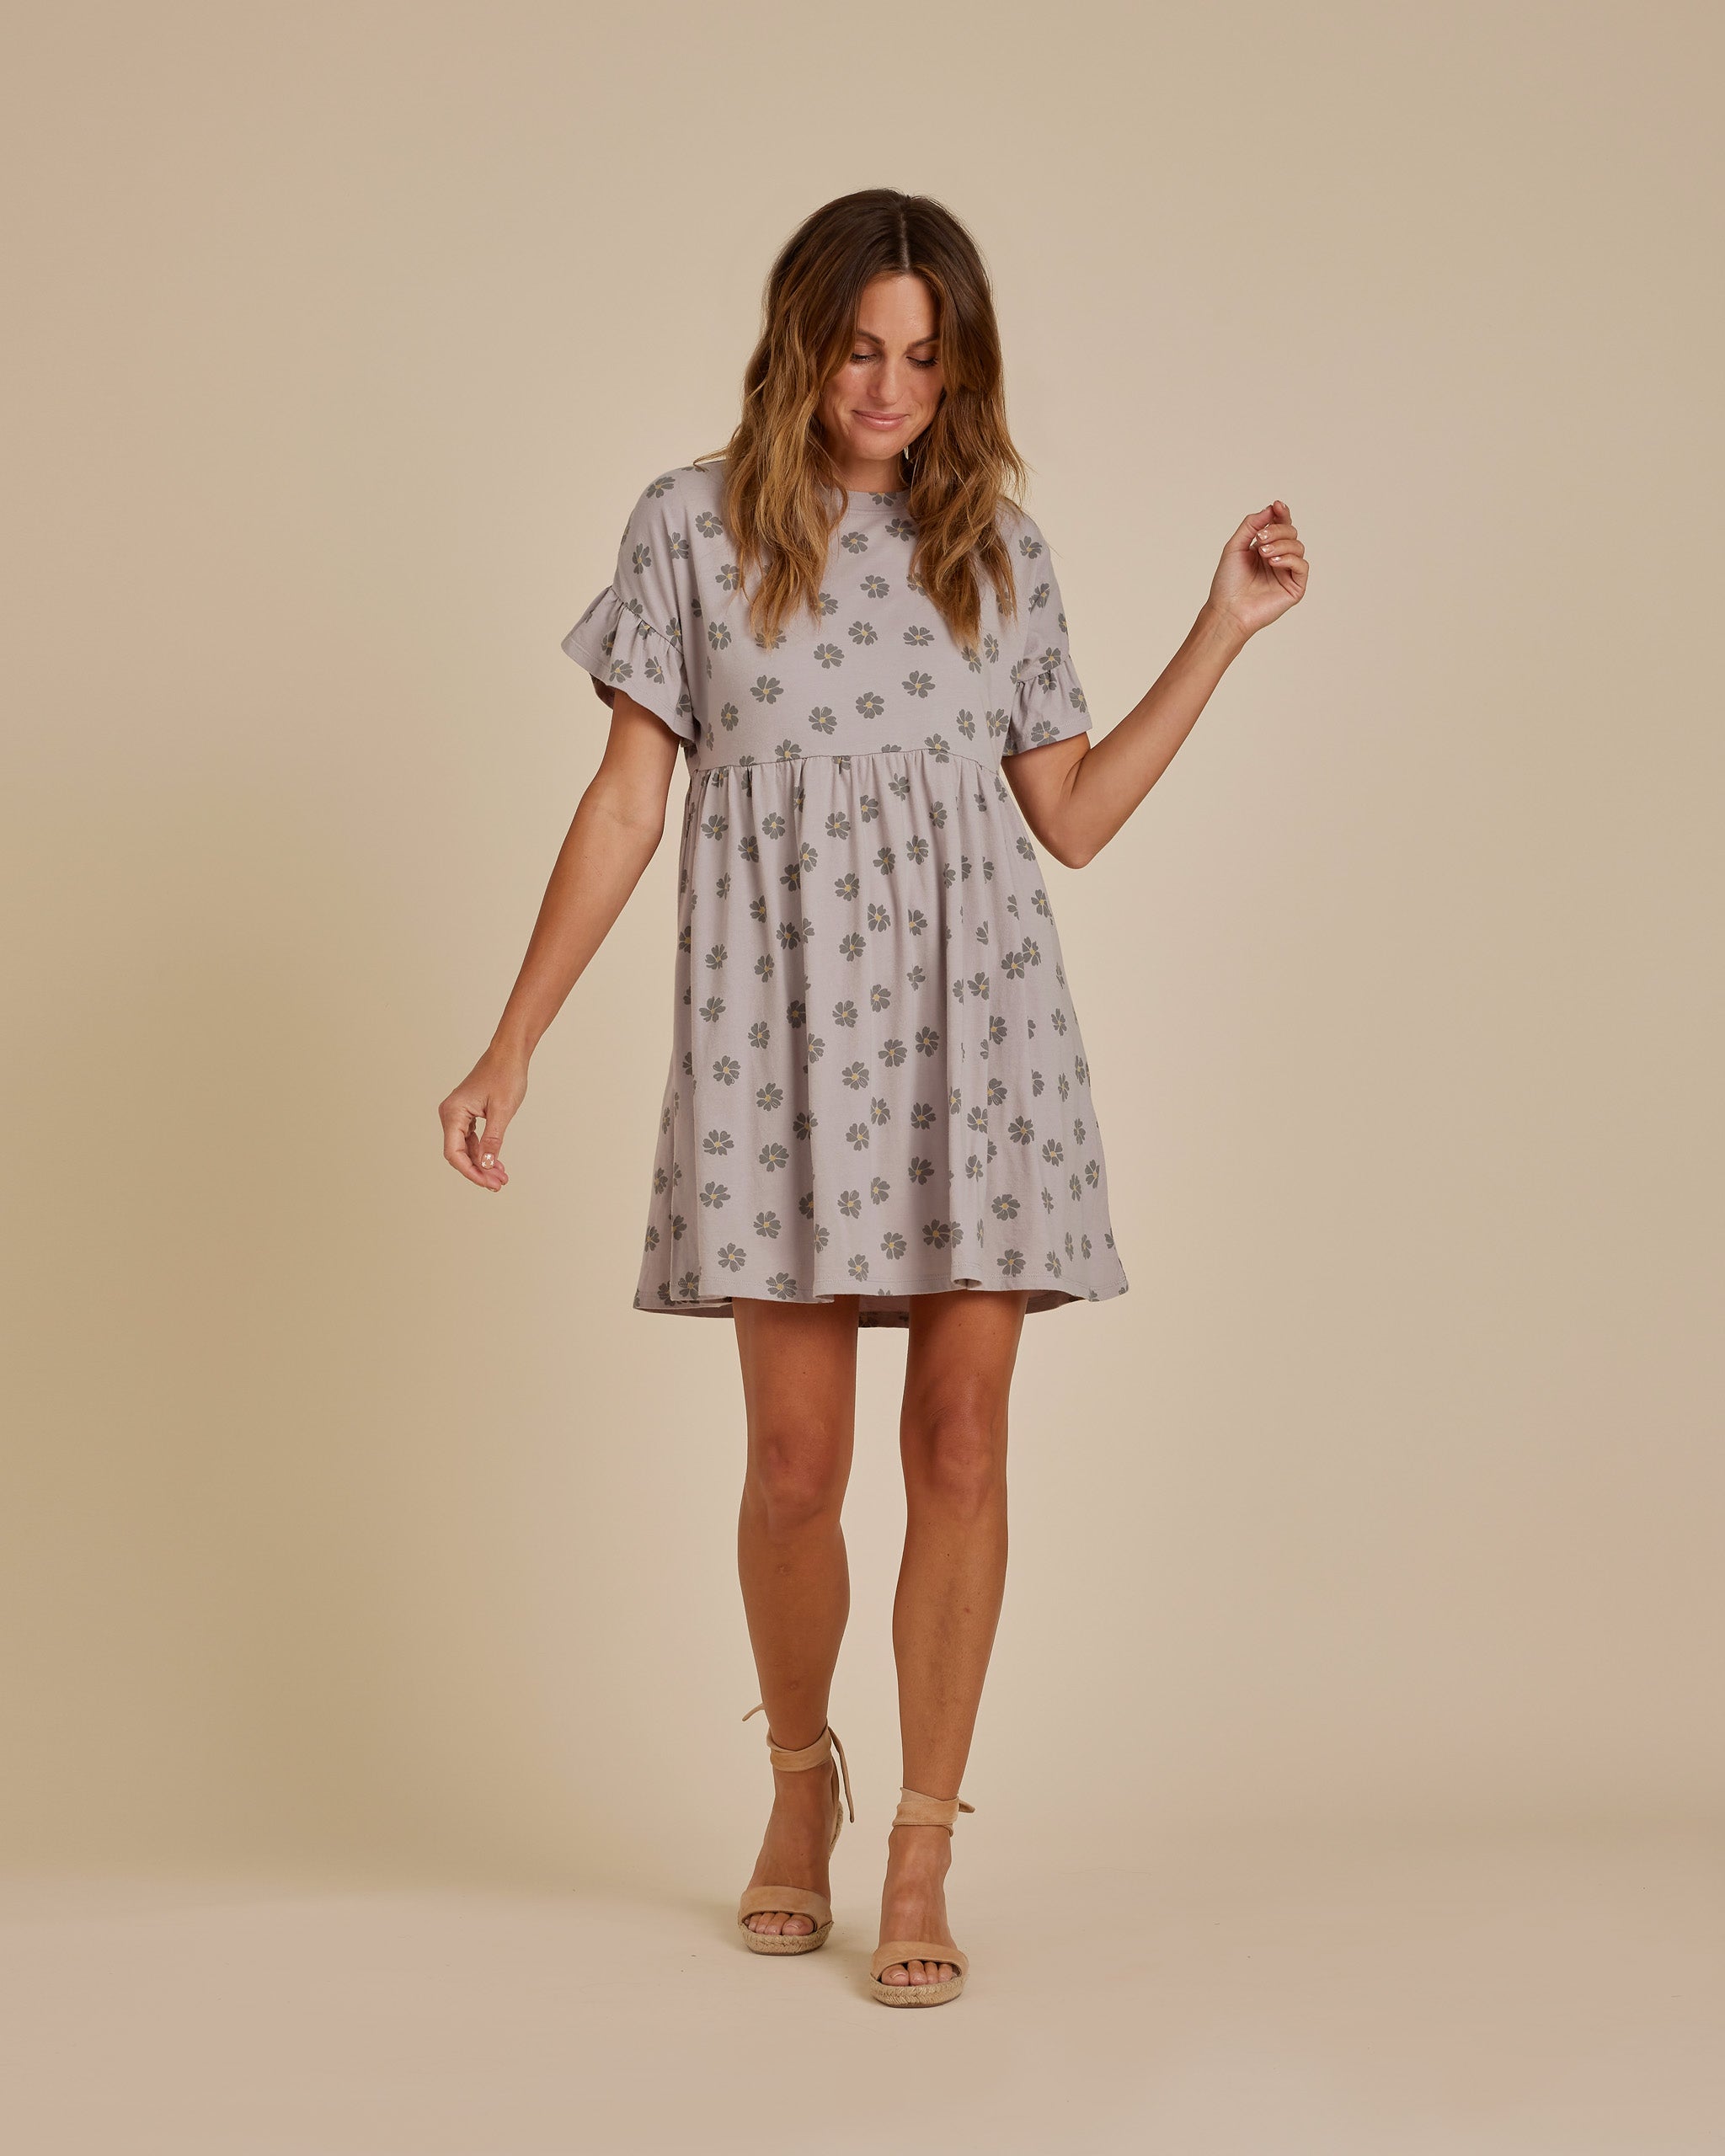 Babydoll Dresses for Women | American Threads – americanthreads